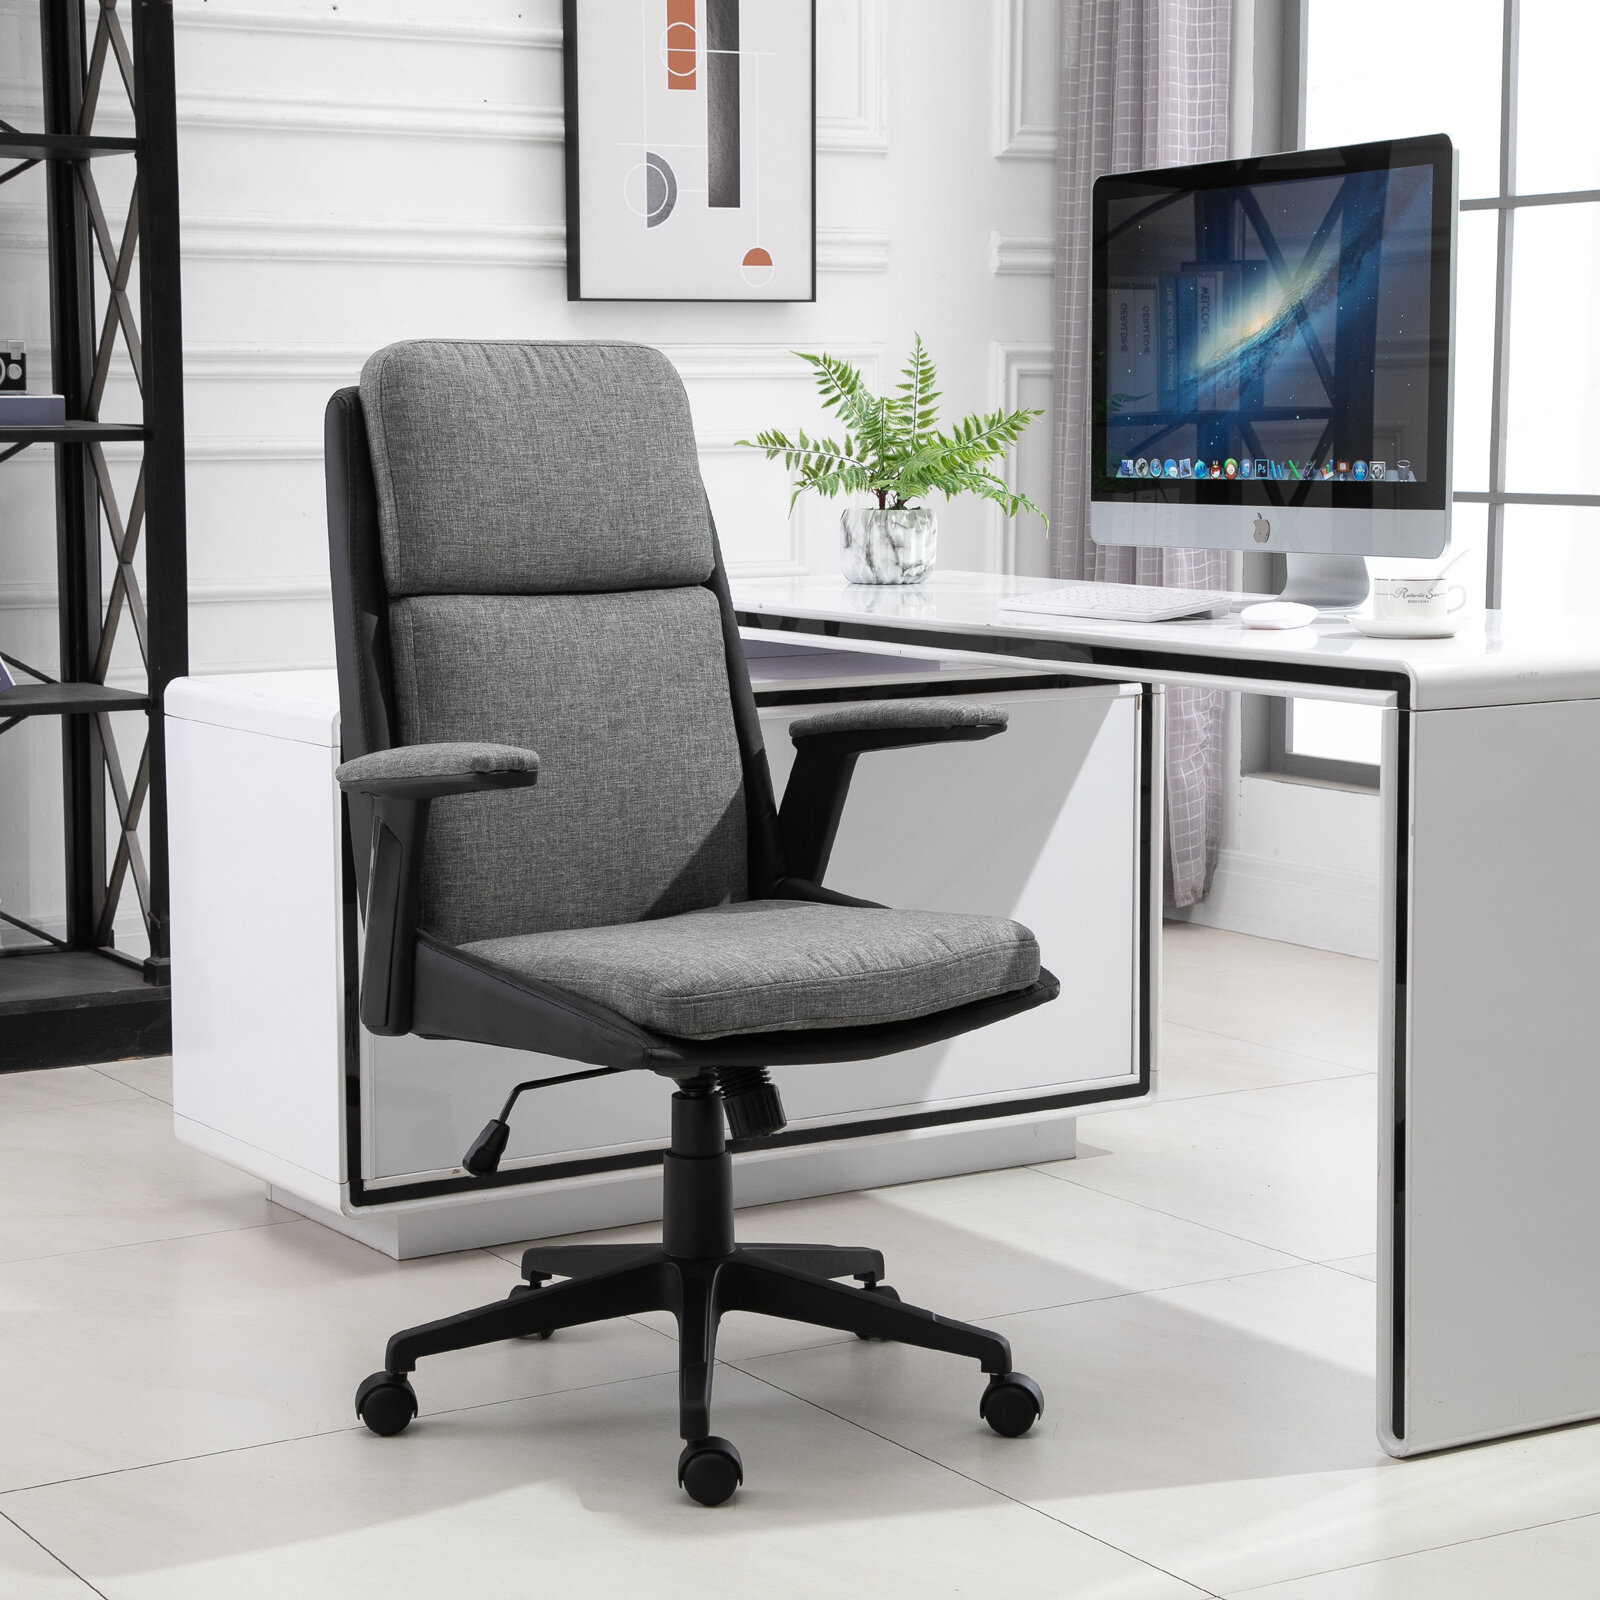 Latitude Run Homcom High Back Office Chair Computer Swivel Rolling Task Chair With Height Adjustable Comfortable With Armrests Wayfair Ca